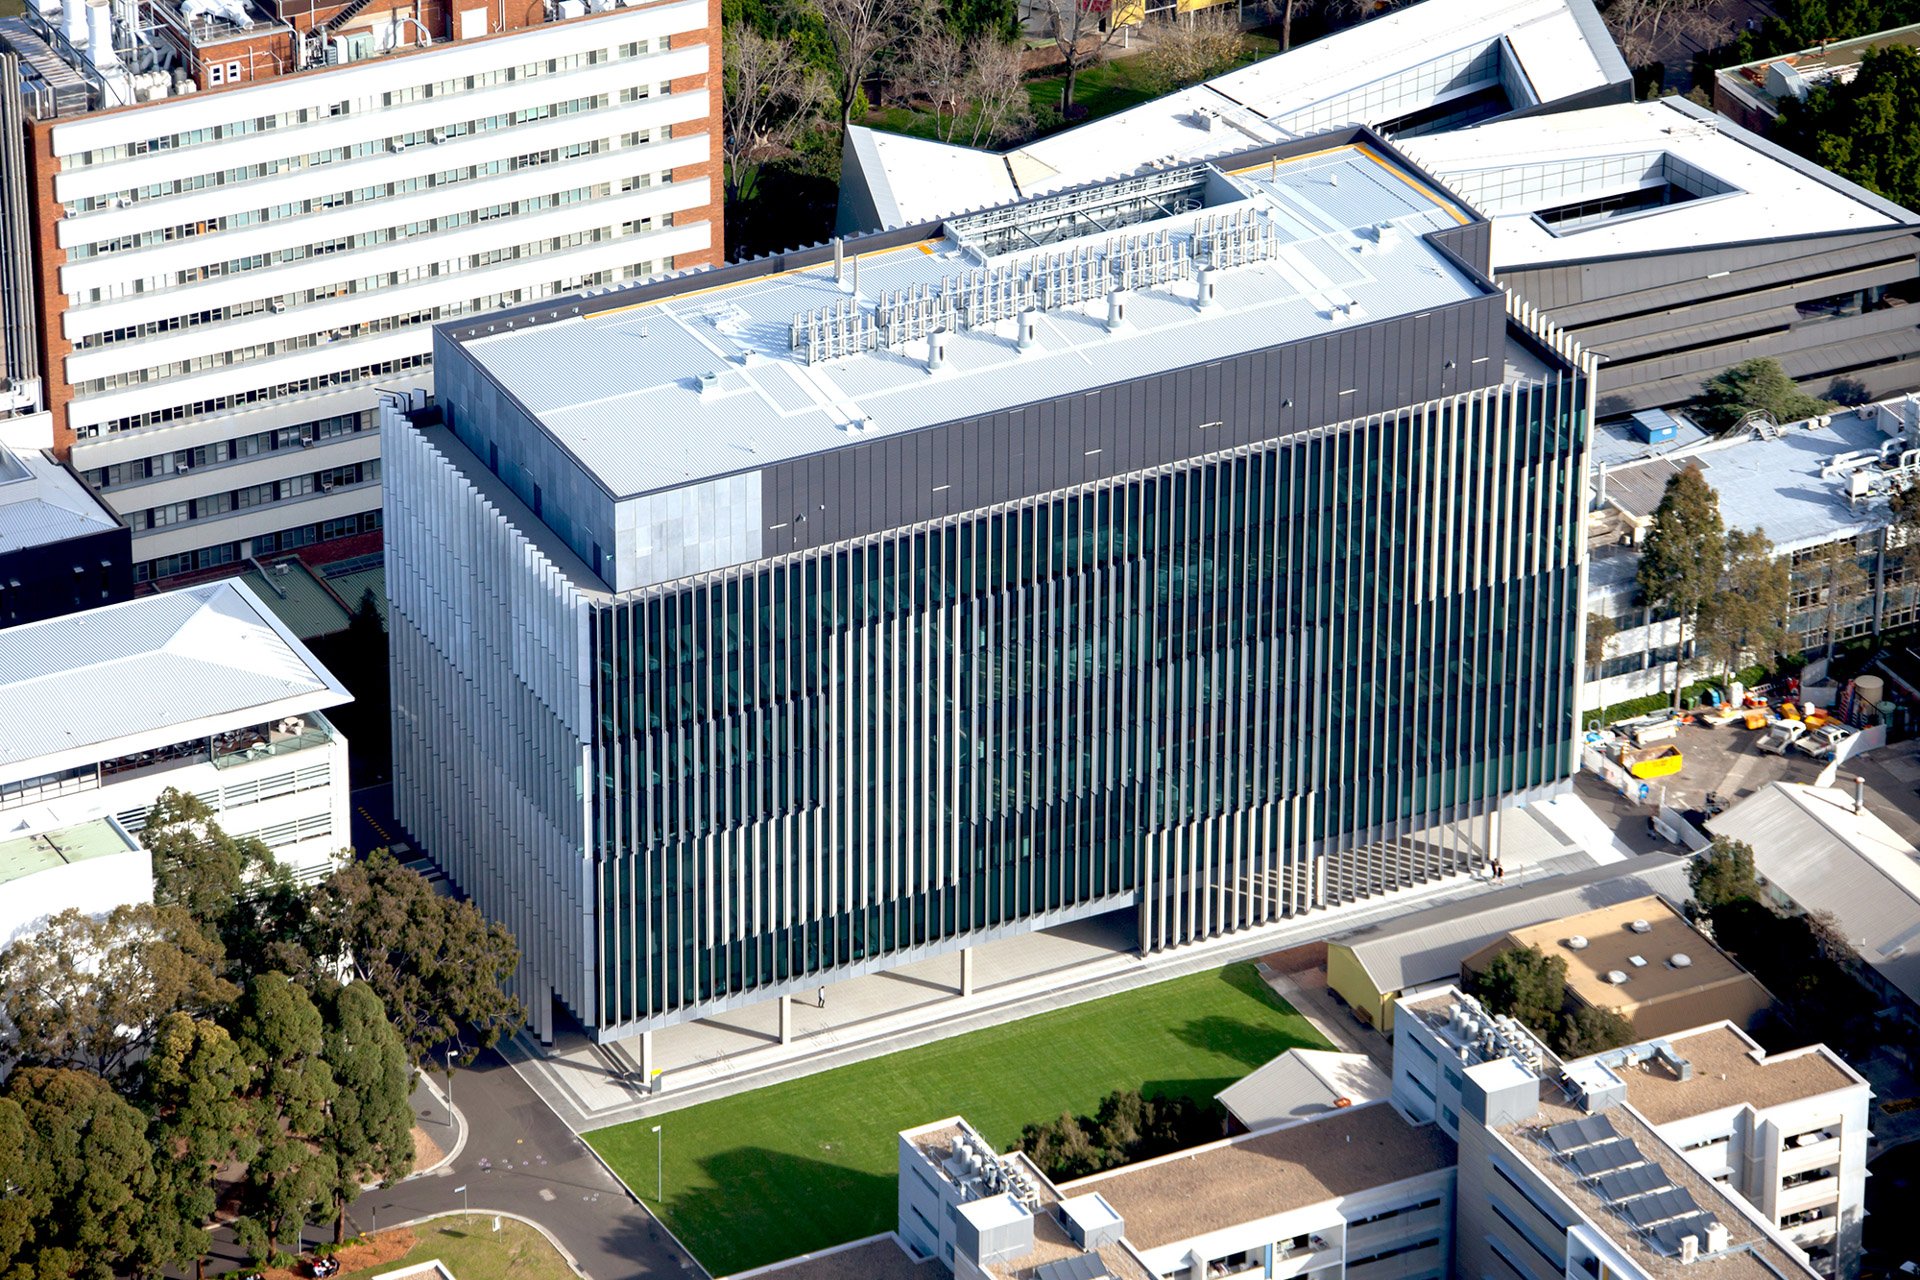 UNSW Material Science & Engineering Building